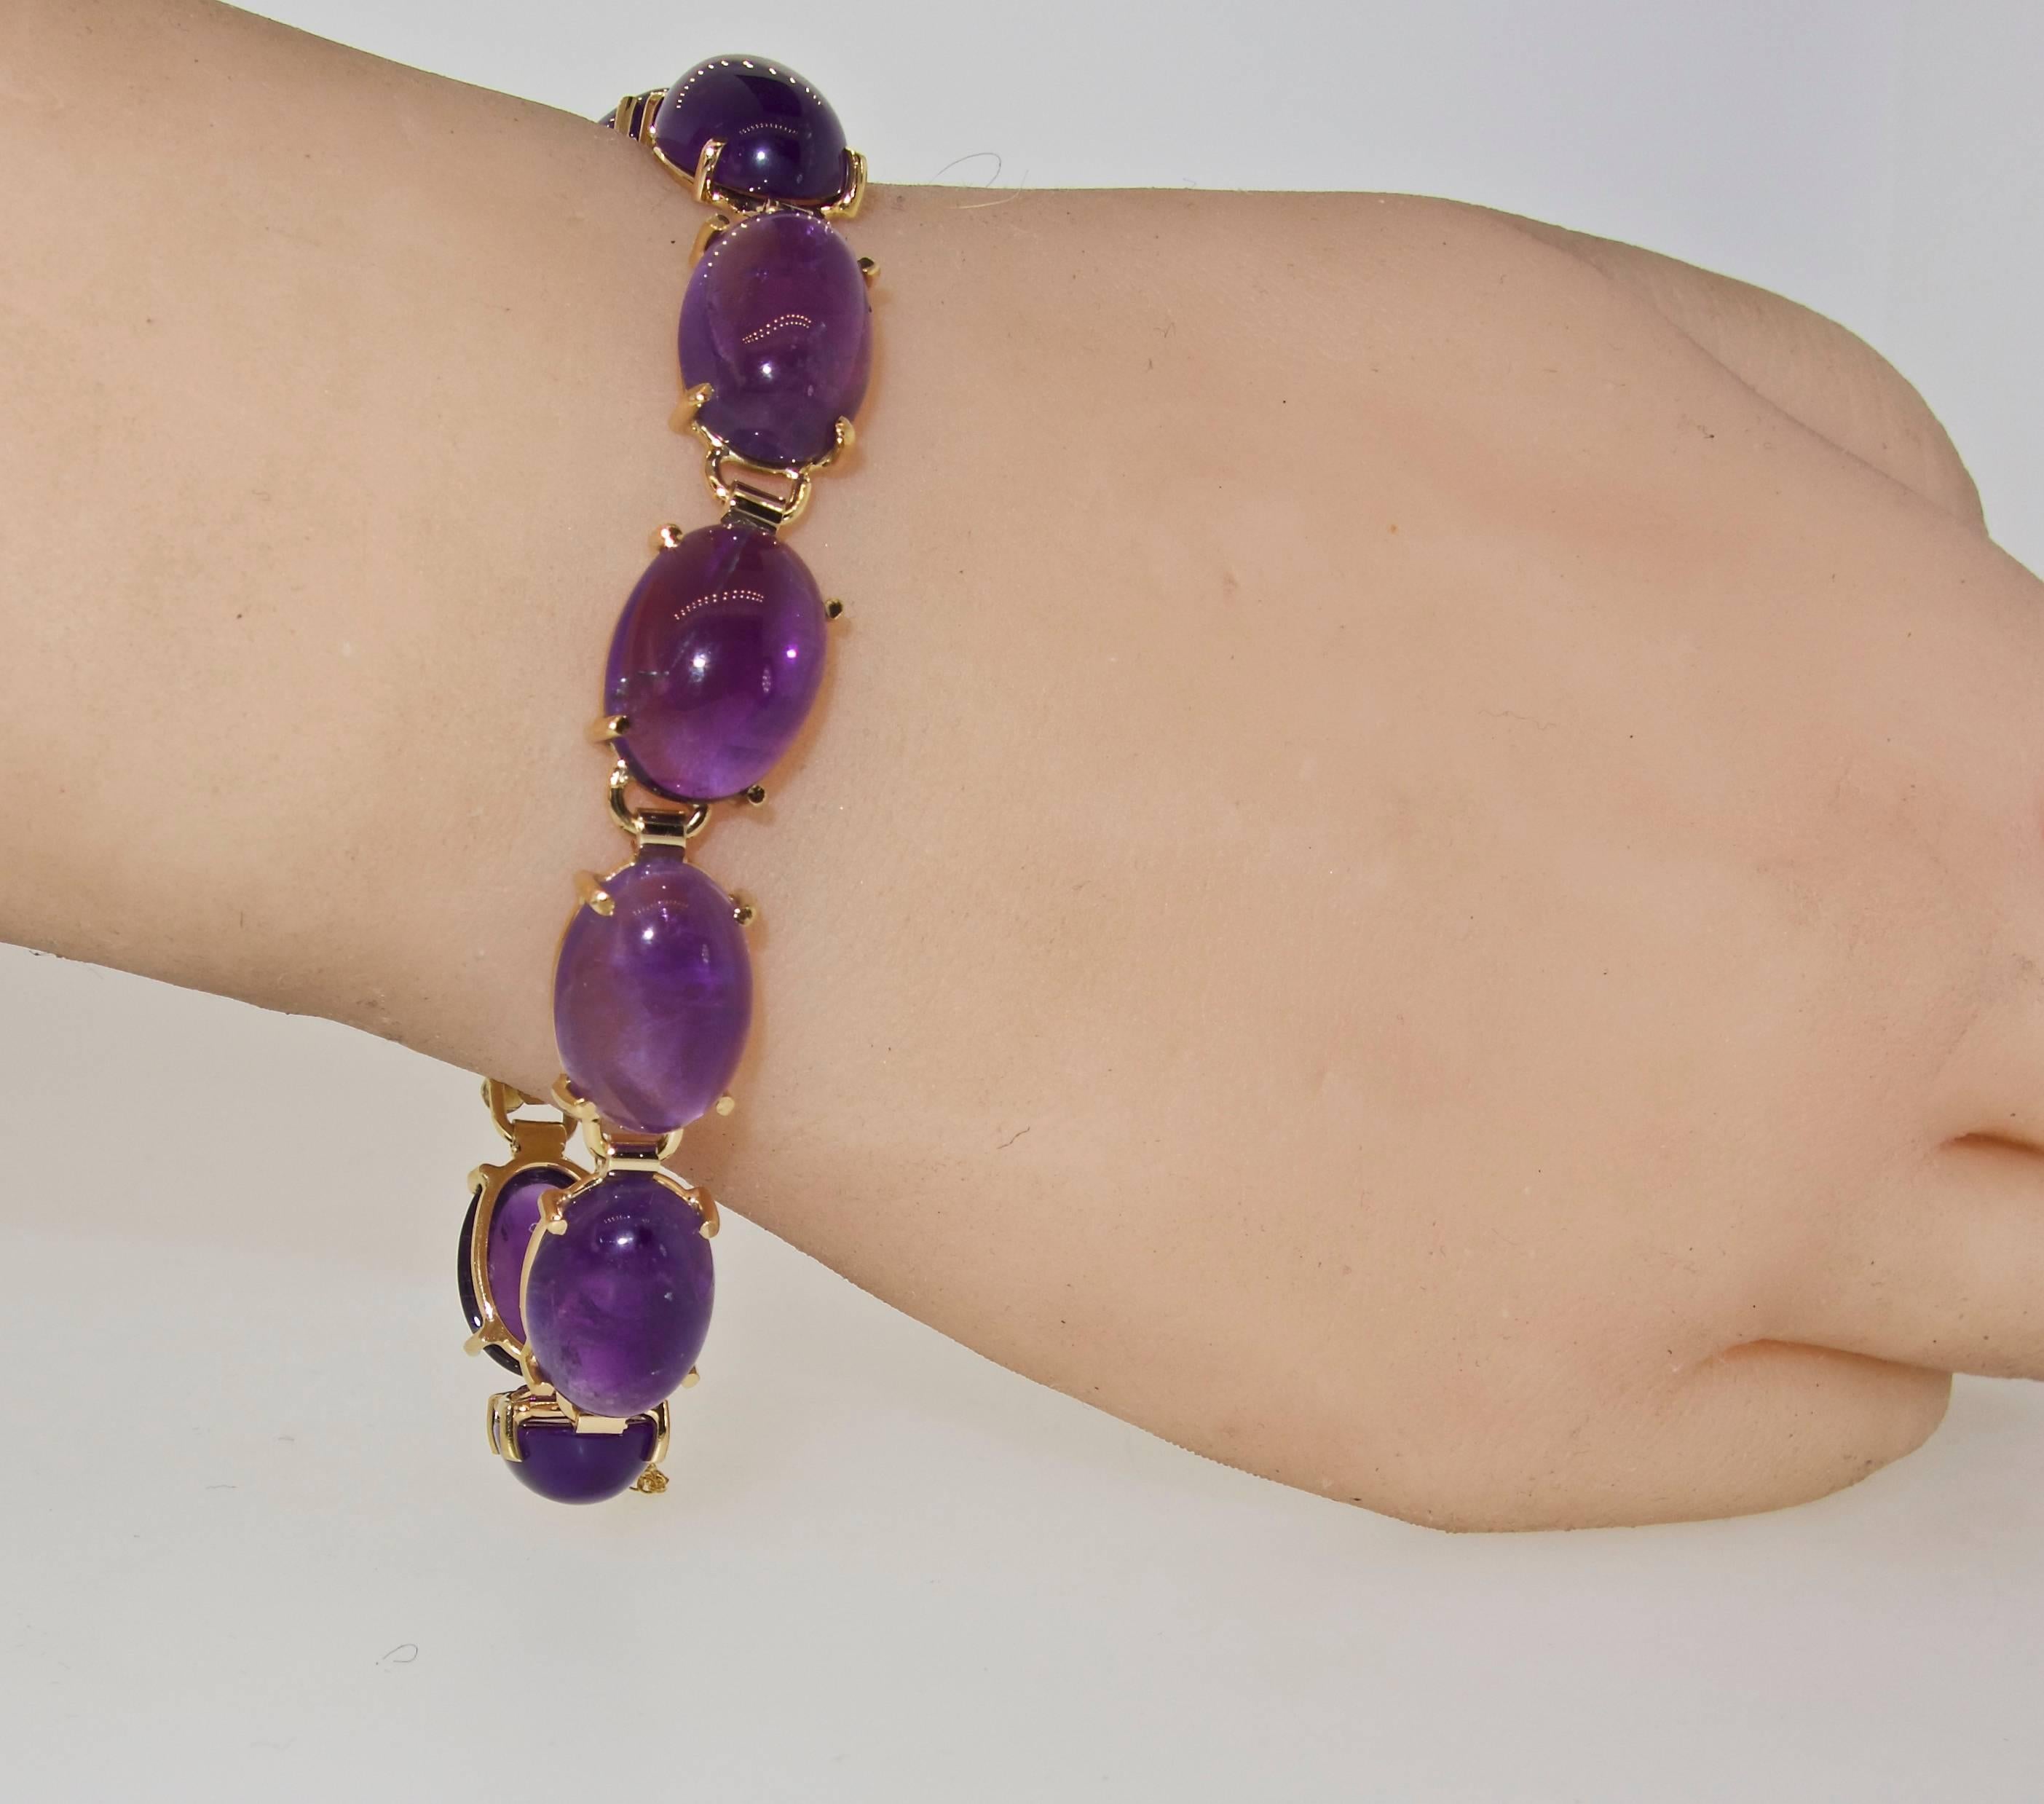 Contemporary Amethyst and Gold Bracelet